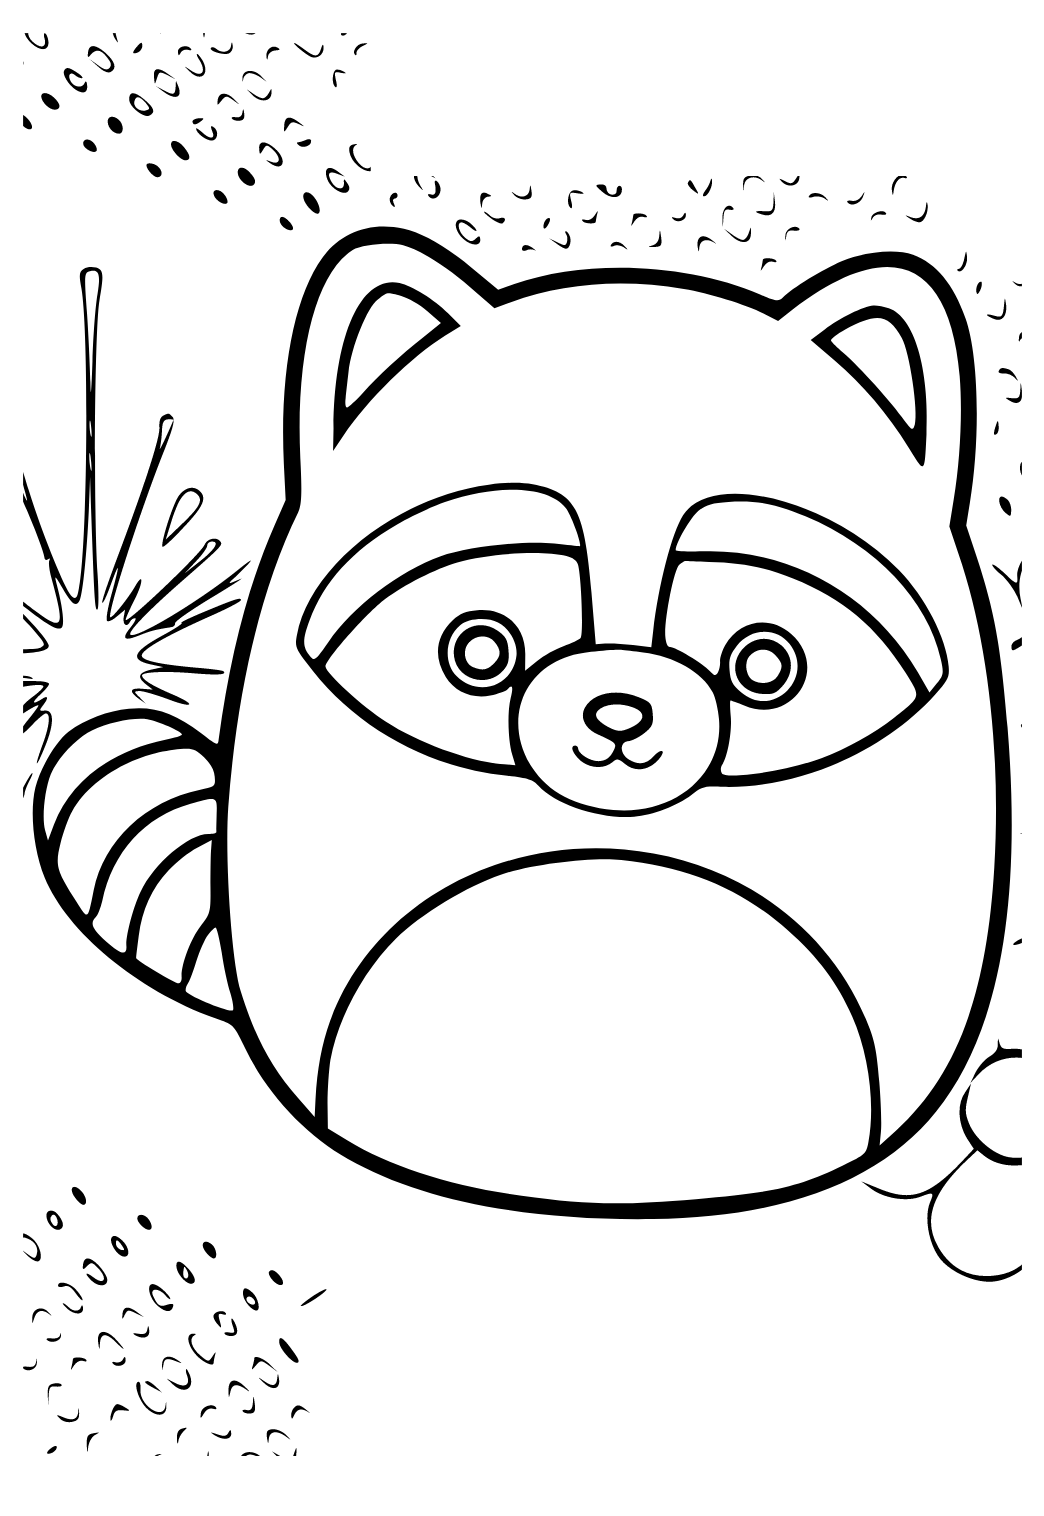 Raccoon Coloring Book For Adults Relaxation: Cute and Amazing